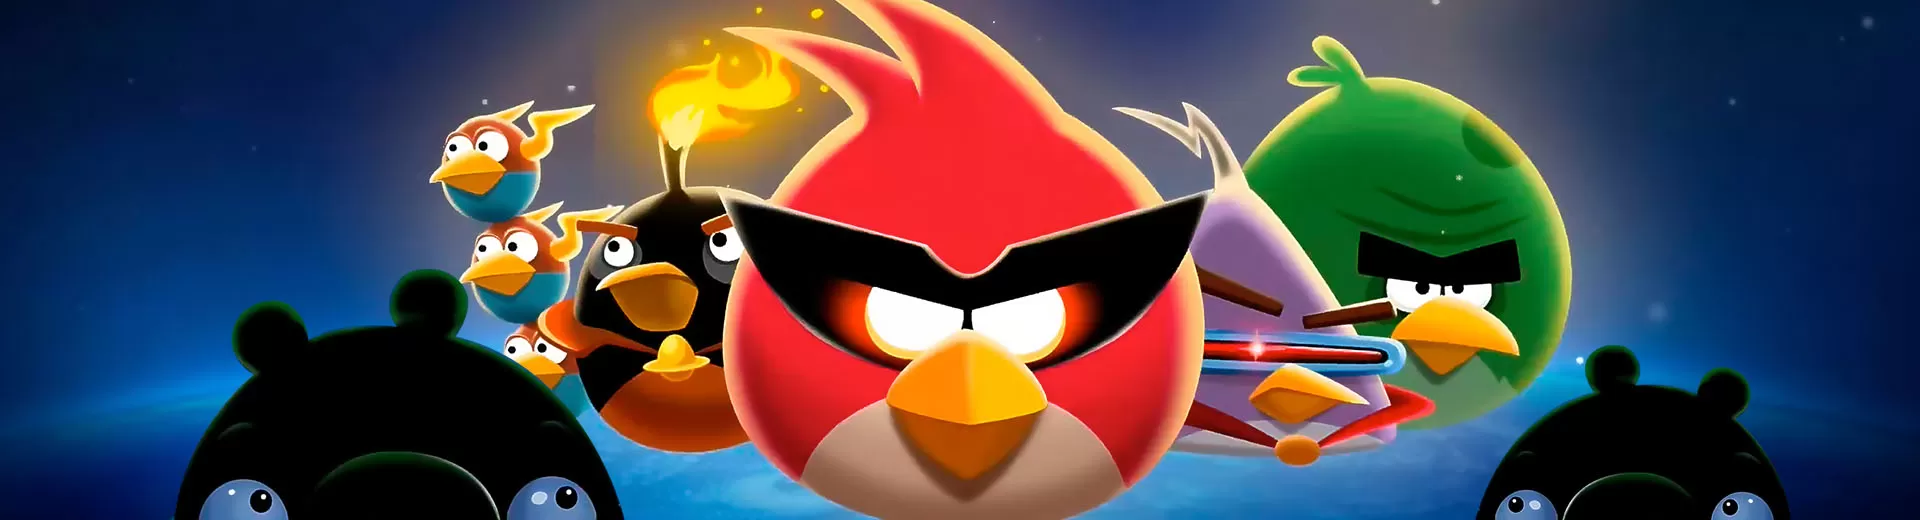 Angry Birds Space Emulator Pc